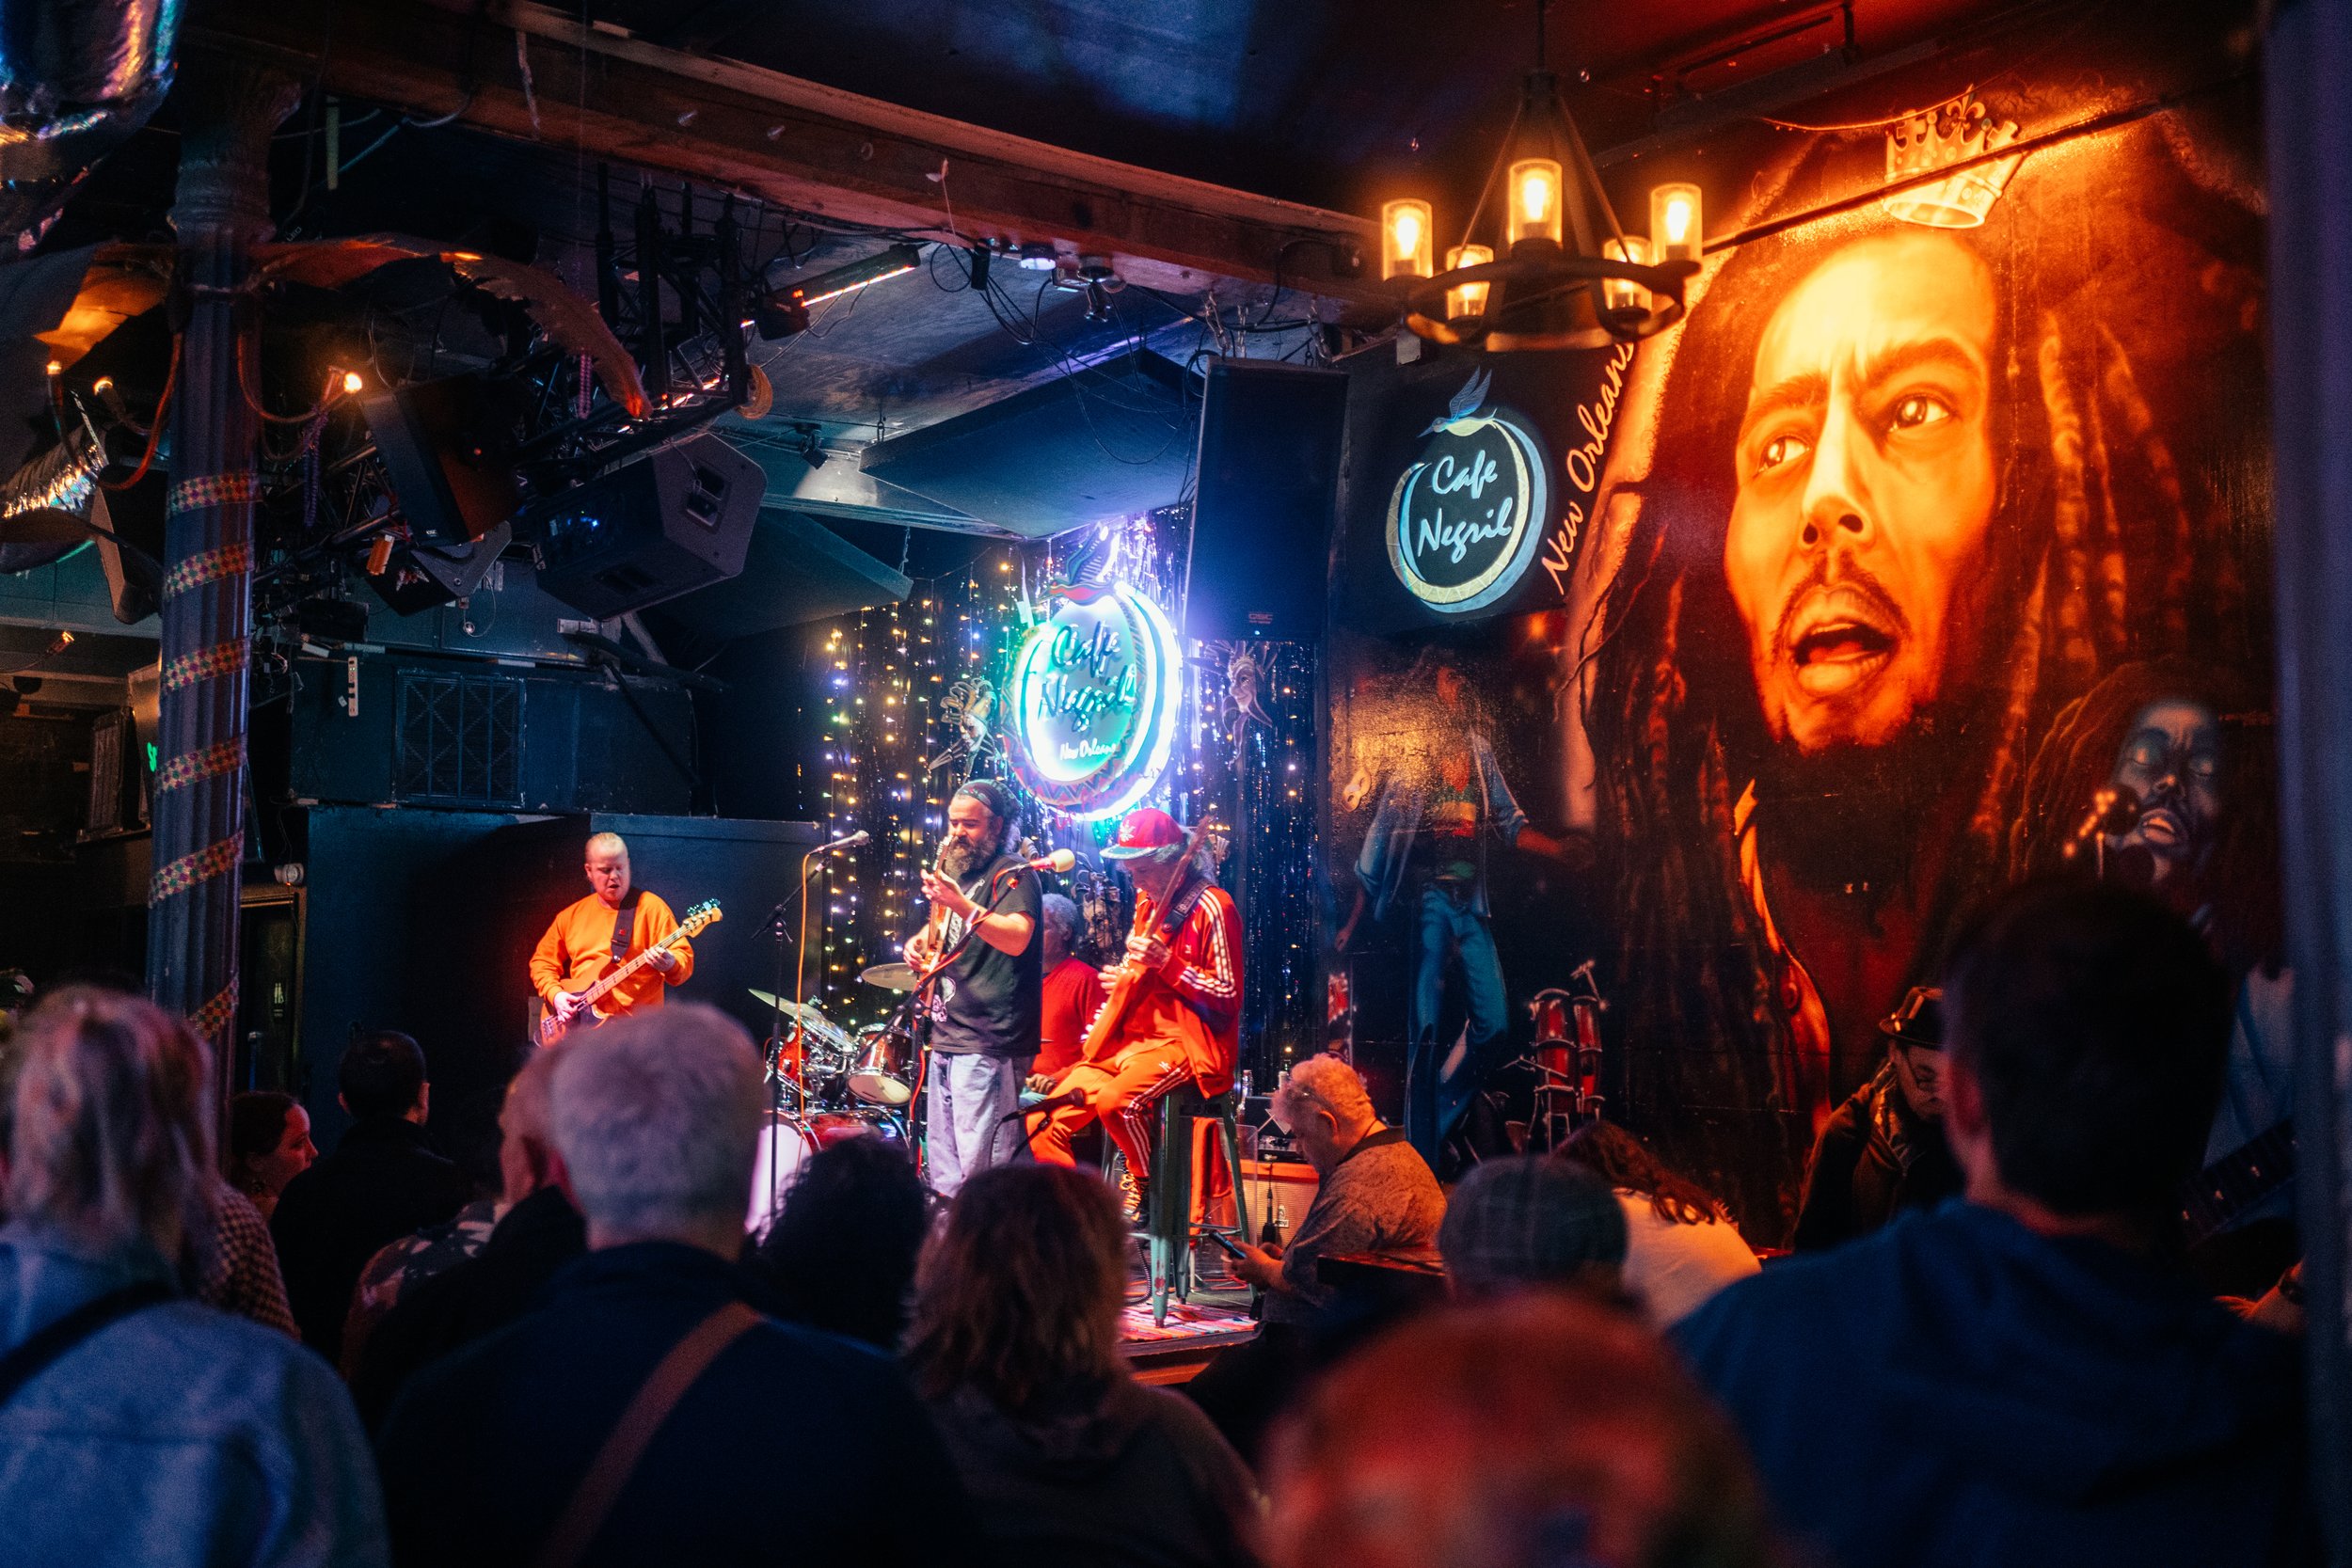 Our favorite blues bar, Cafe Negril, on Frenchman Street in New Orleans